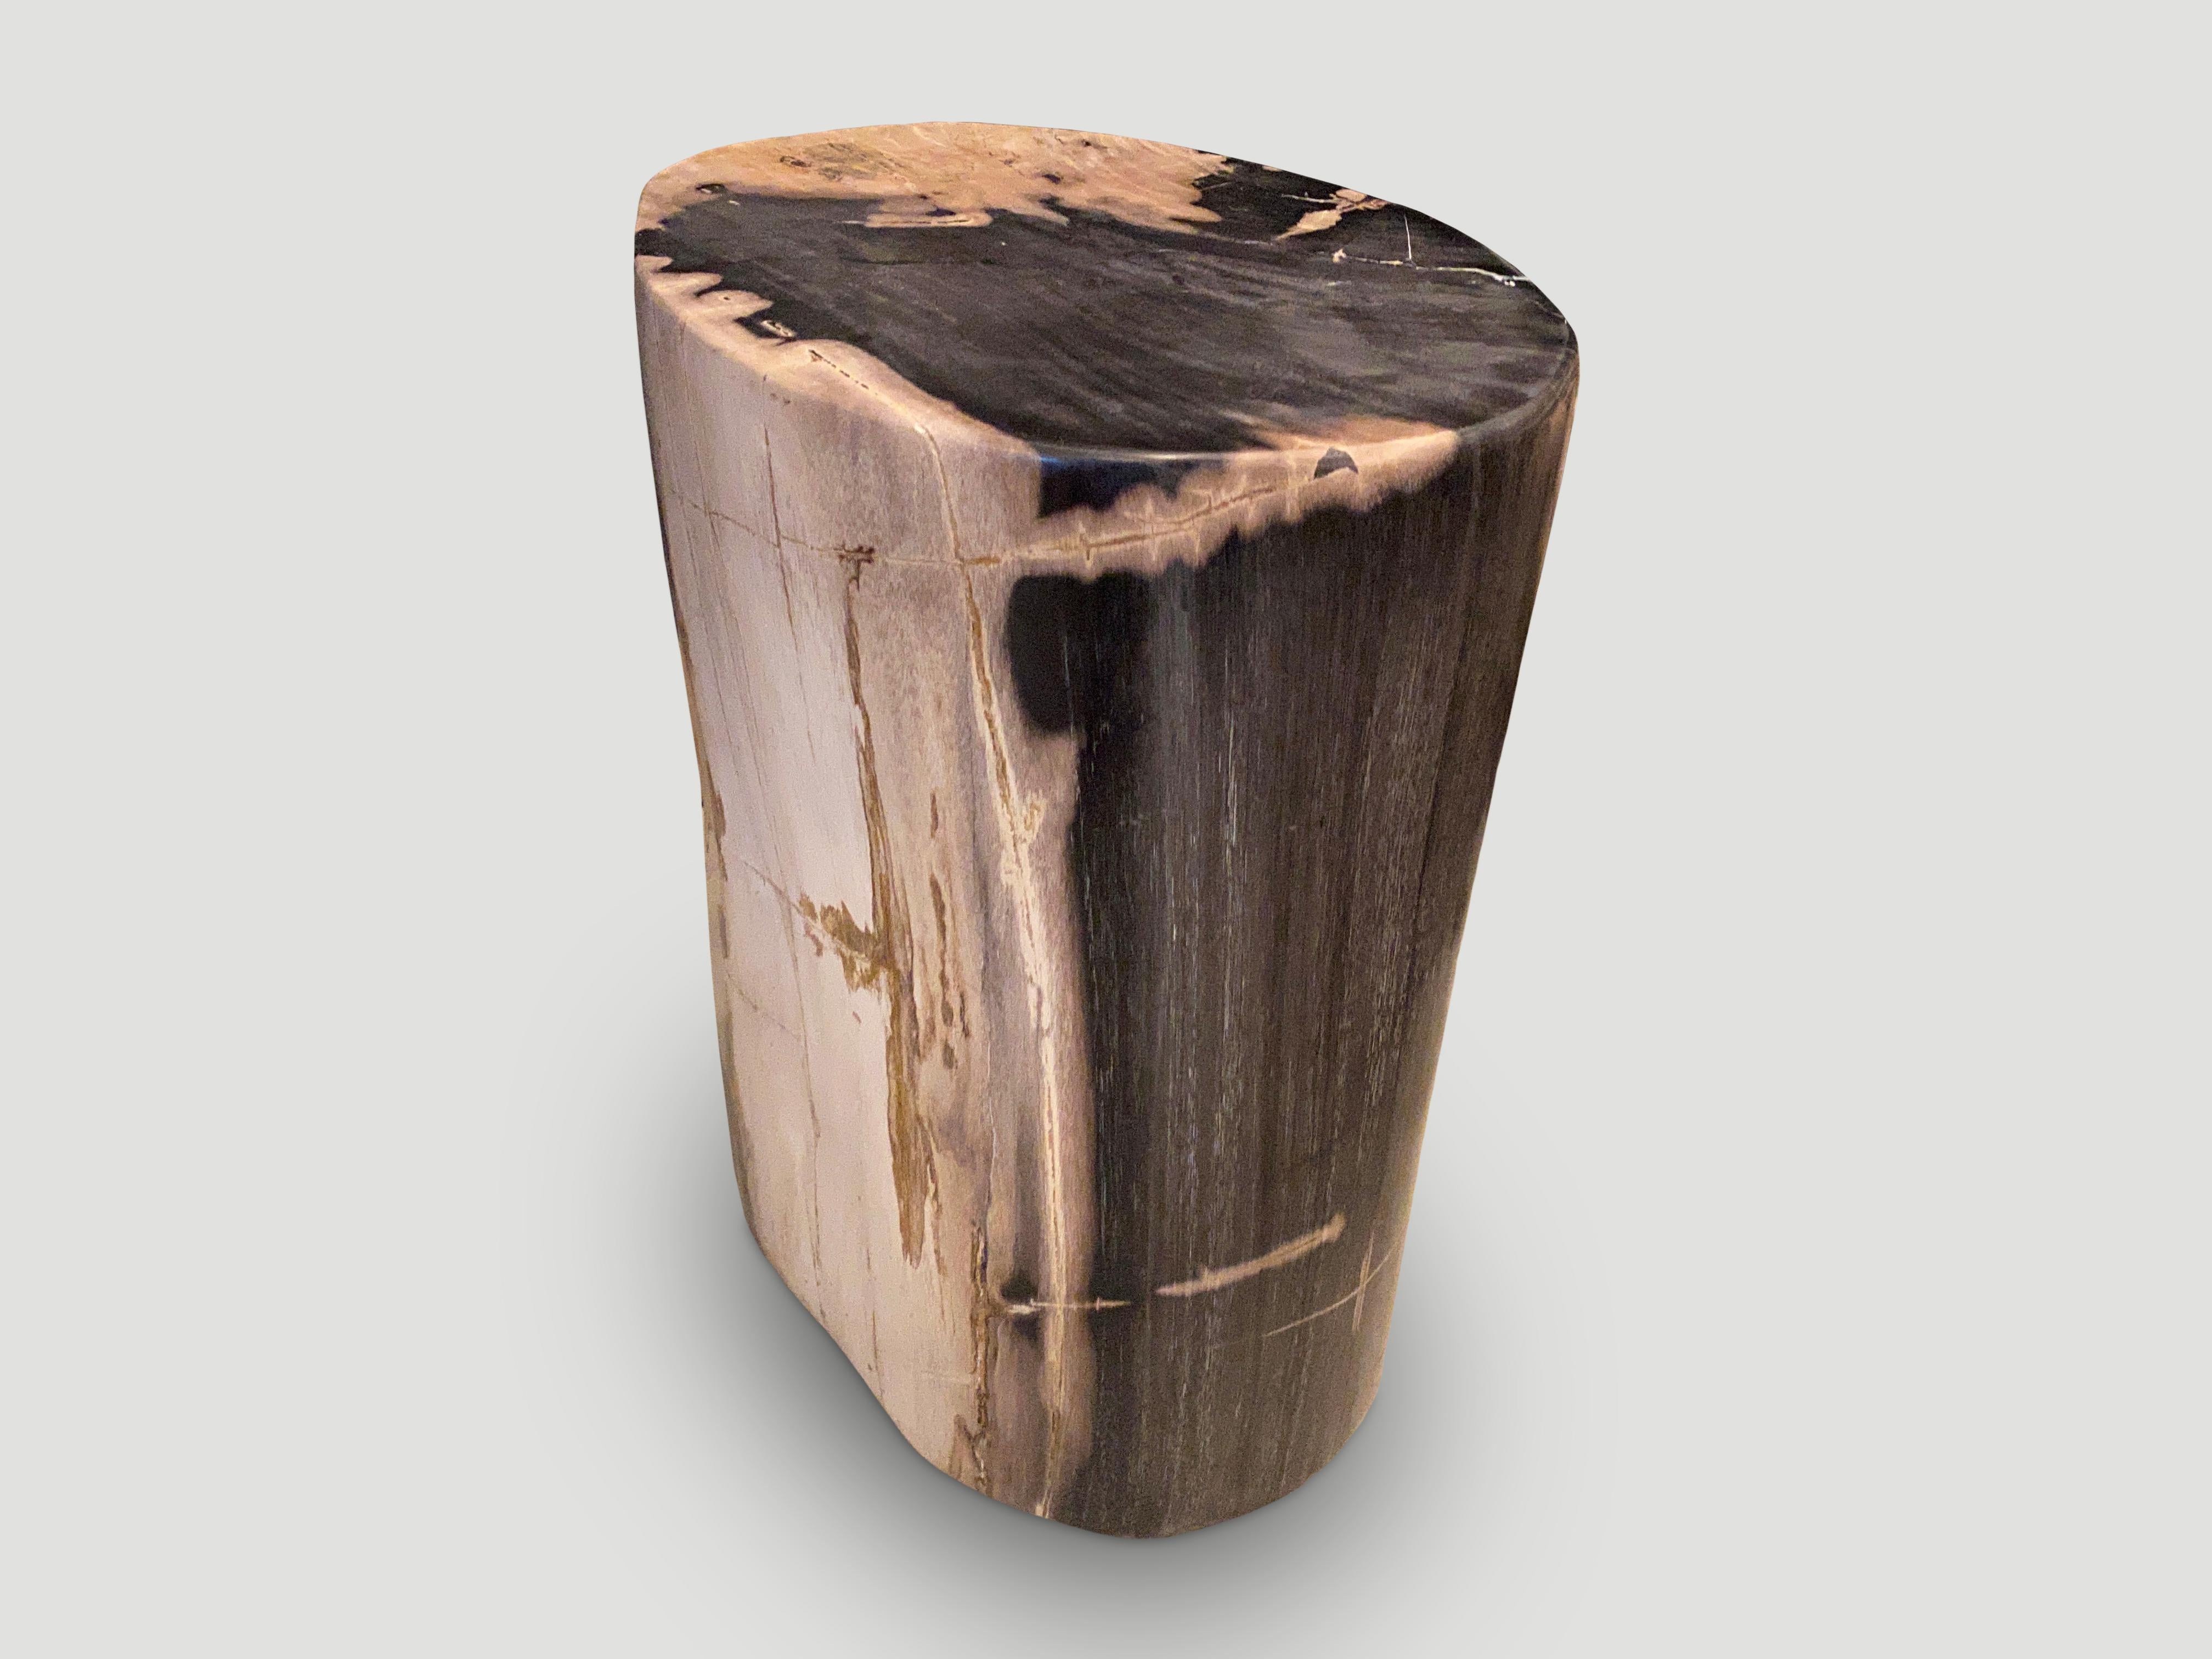 Organic Modern Andrianna Shamaris Exquisite High Quality Petrified Wood Side Table For Sale